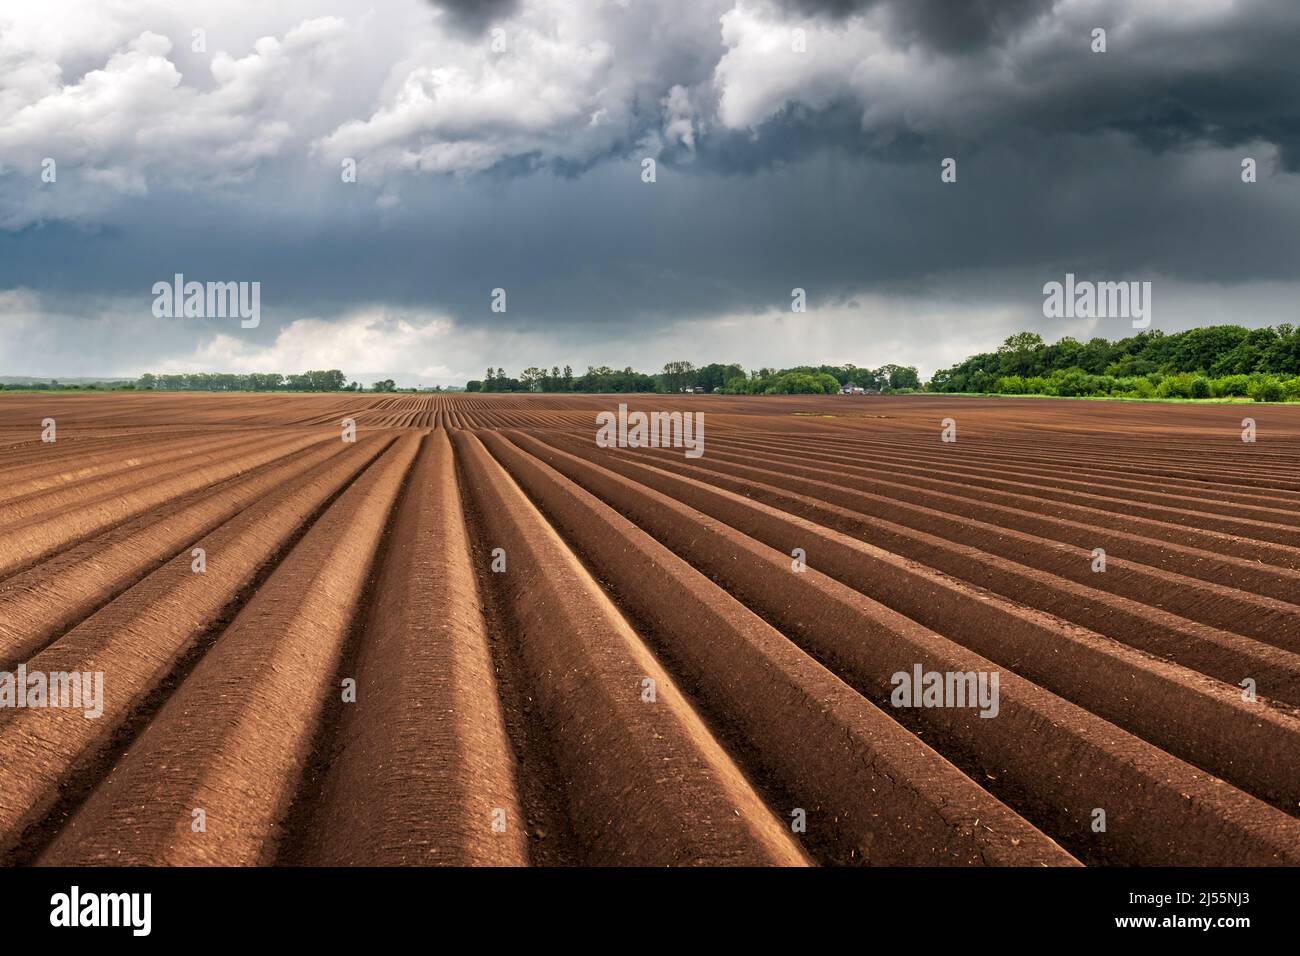 Agricultural field with even rows in the spring. Growing potatoes. Rainy dark clouds in the background. Ukraine agriculture Stock Photo